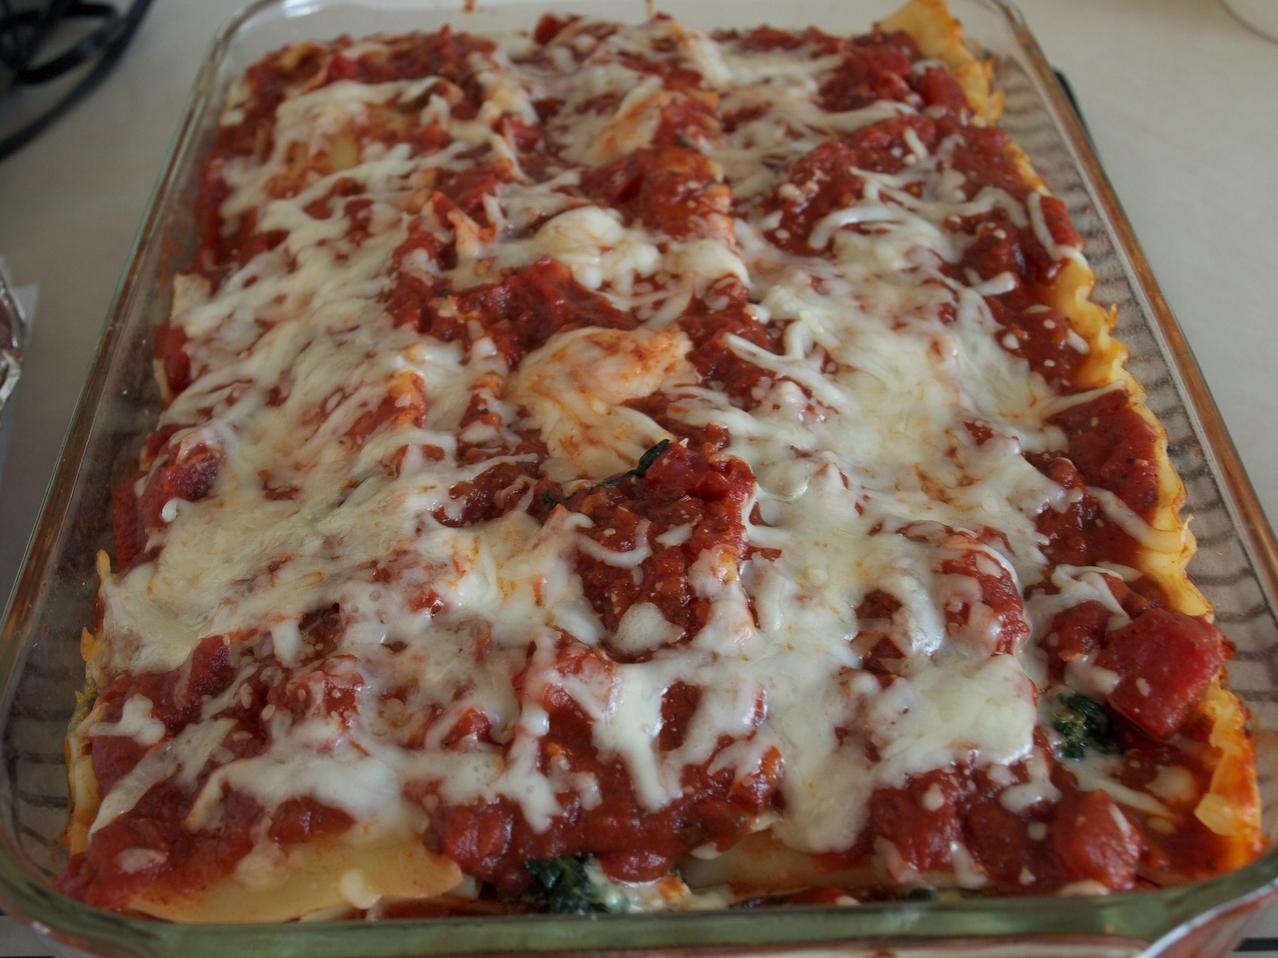  Tired of the same old pasta dishes? Try this unique twist on classic lasagna.